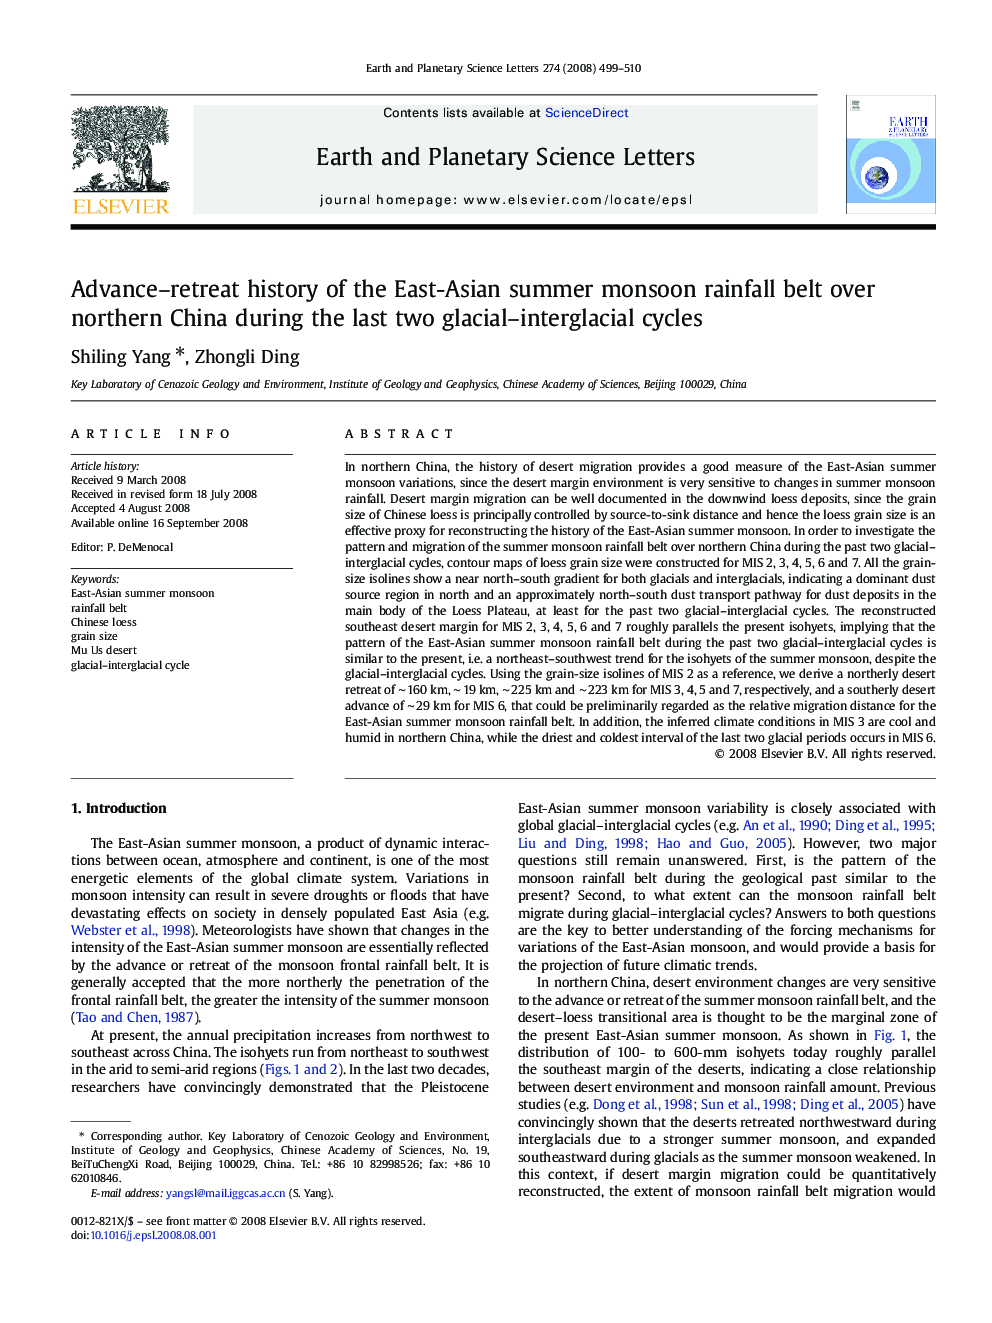 Advance–retreat history of the East-Asian summer monsoon rainfall belt over northern China during the last two glacial–interglacial cycles